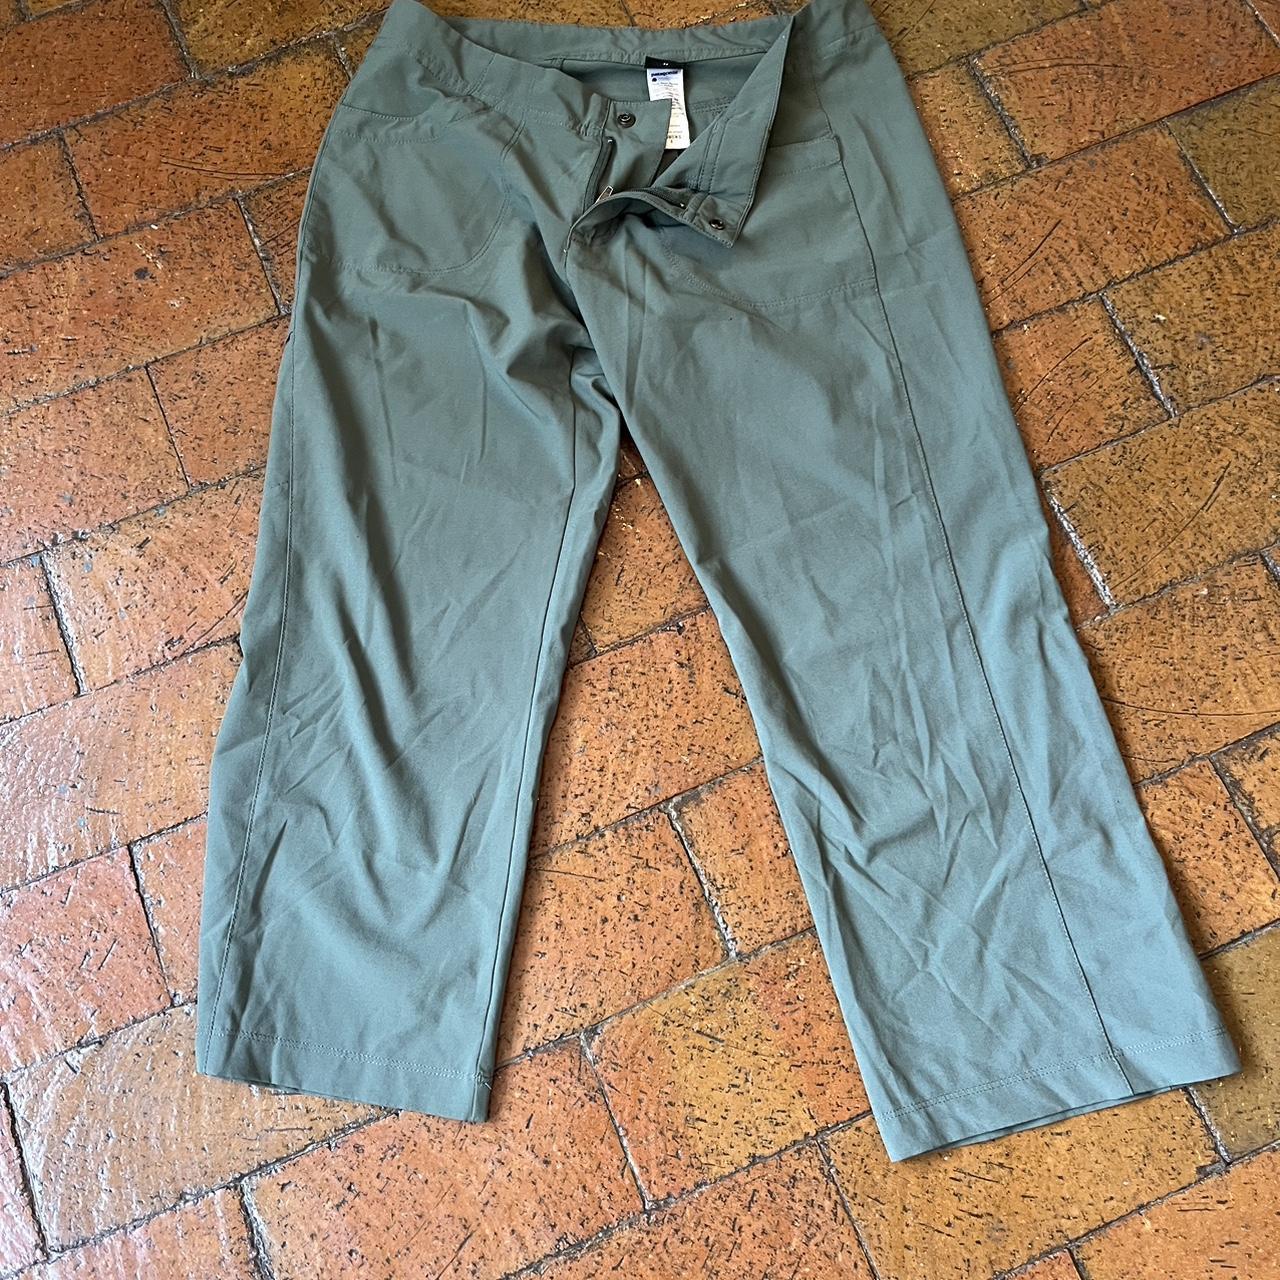 Patagonia lightweight grey-green capris. Great for